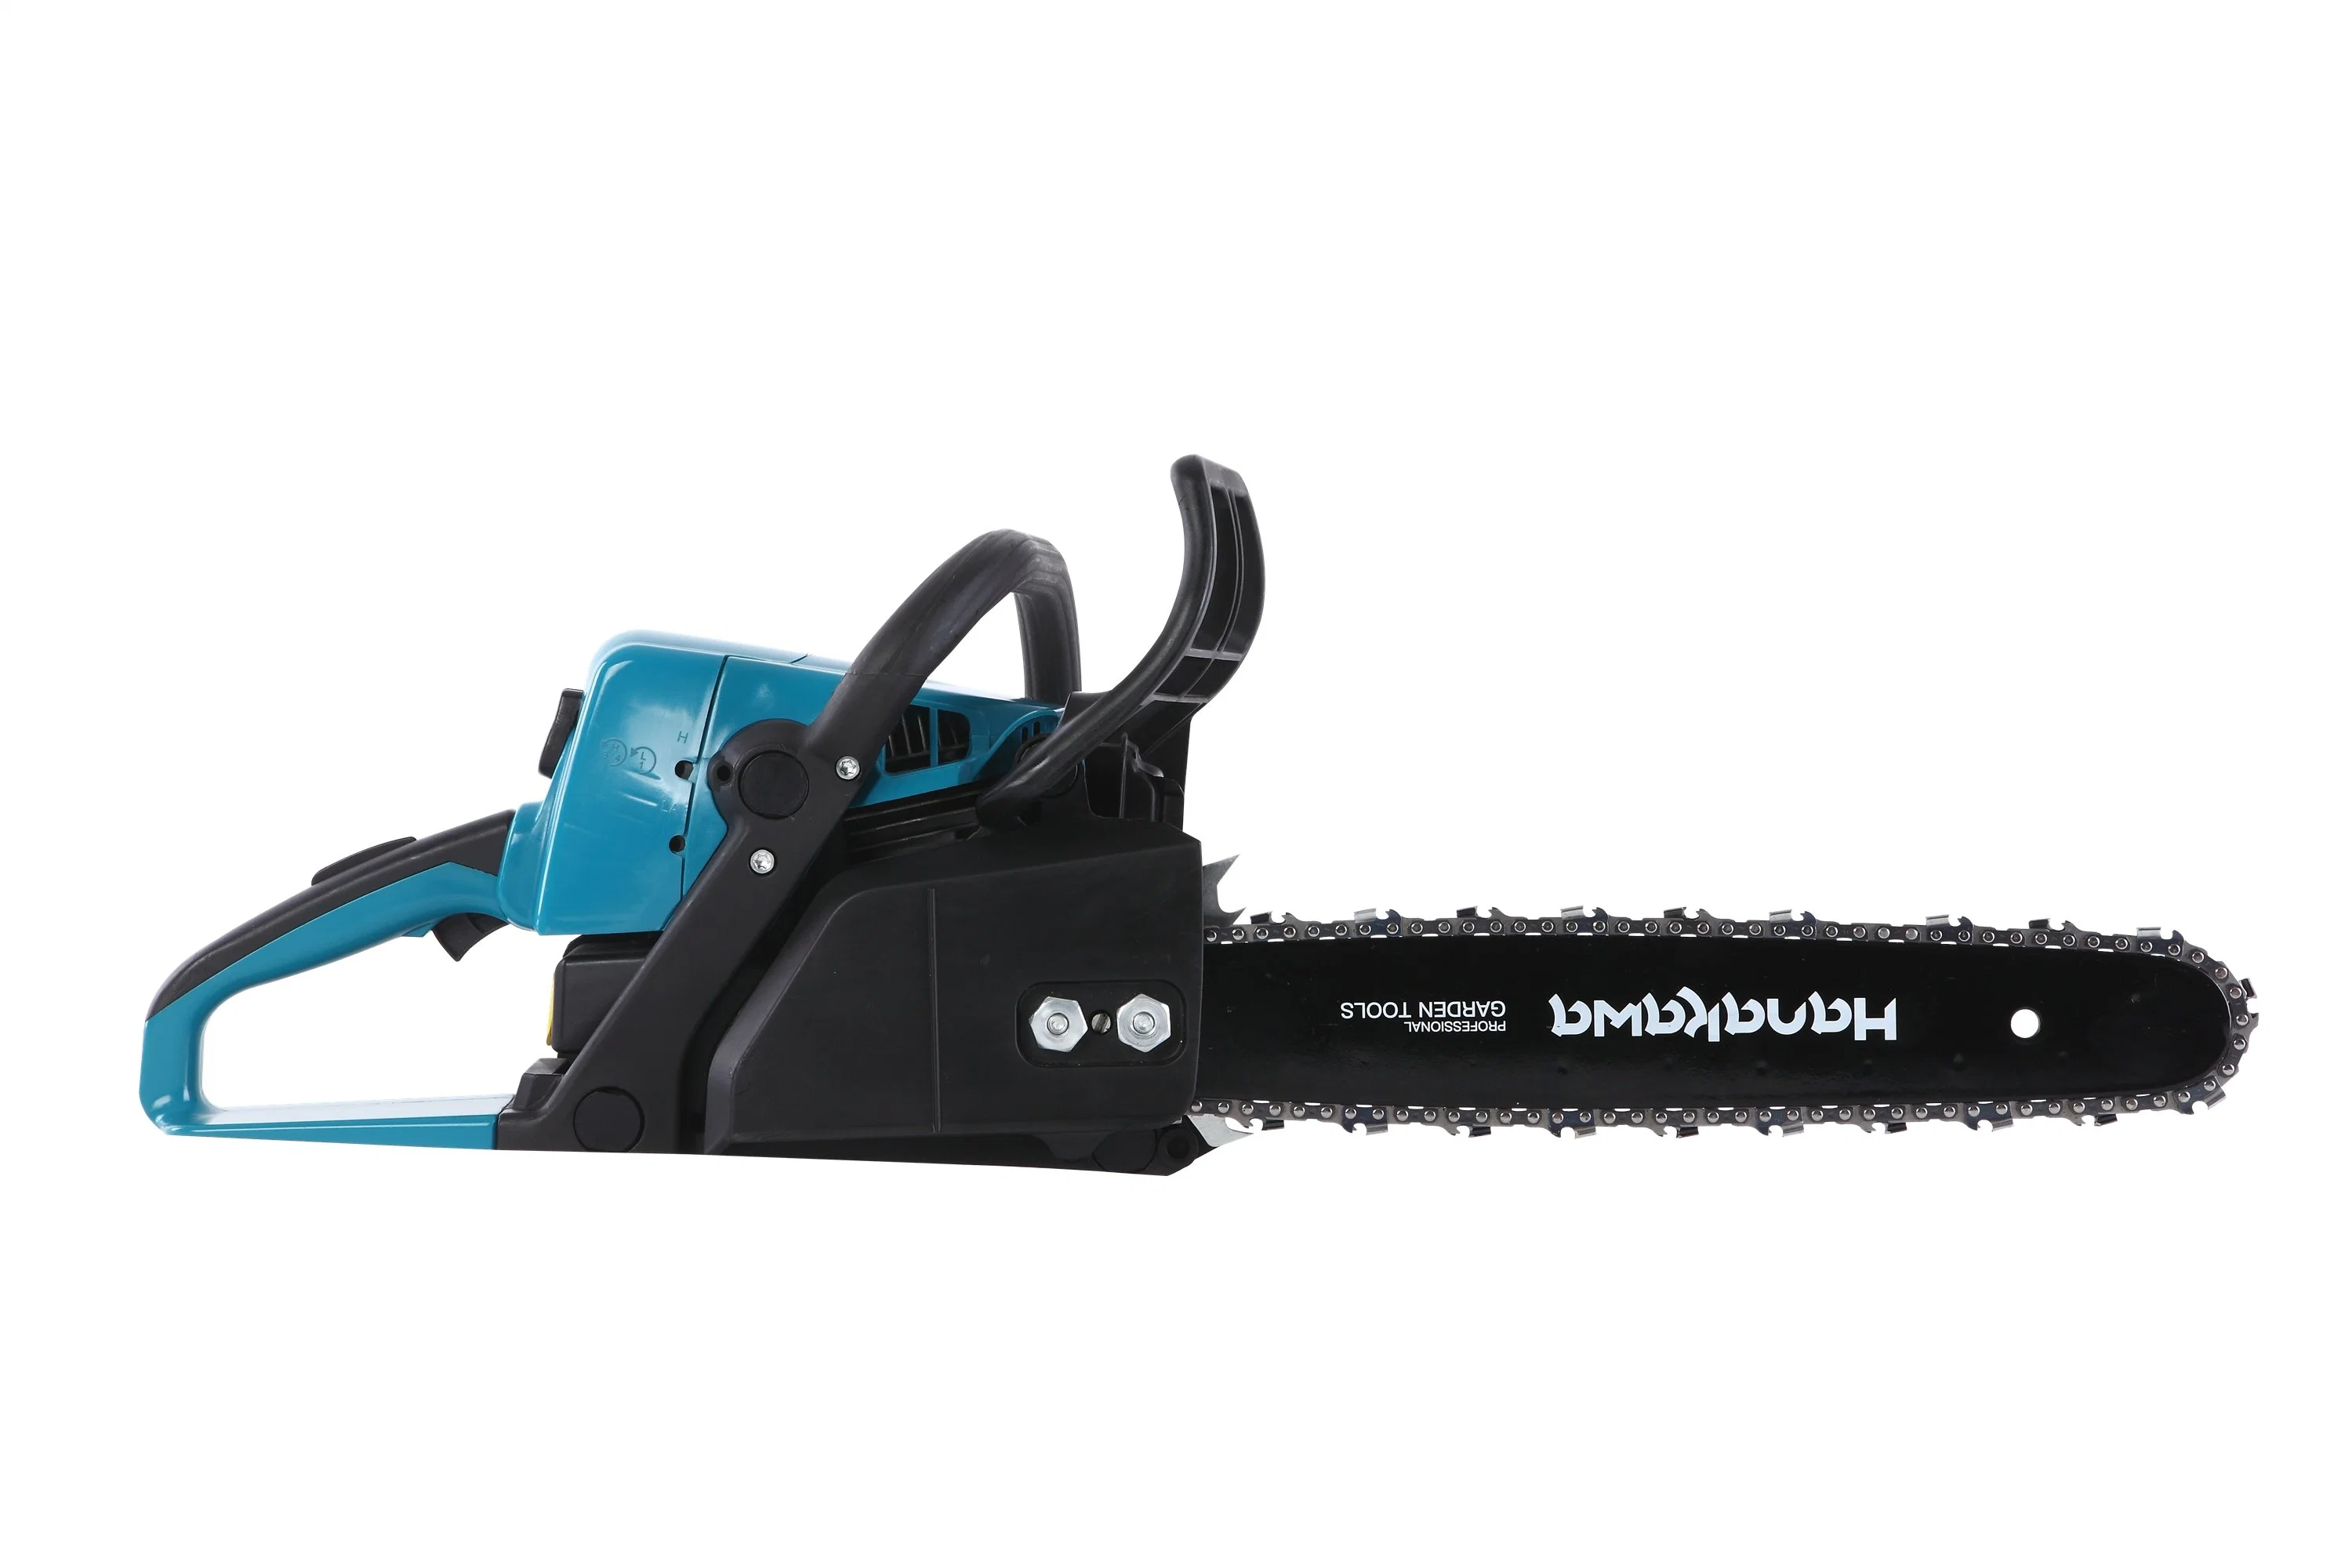 3hanakawa H945 (250) 45.5cc 2-Stroke Chainsaw for Cutting Planks Chainsaw Professional Loggers Chain Saw Manufacturer Chain Saw Tool Chainsaw Cut Tree Roots